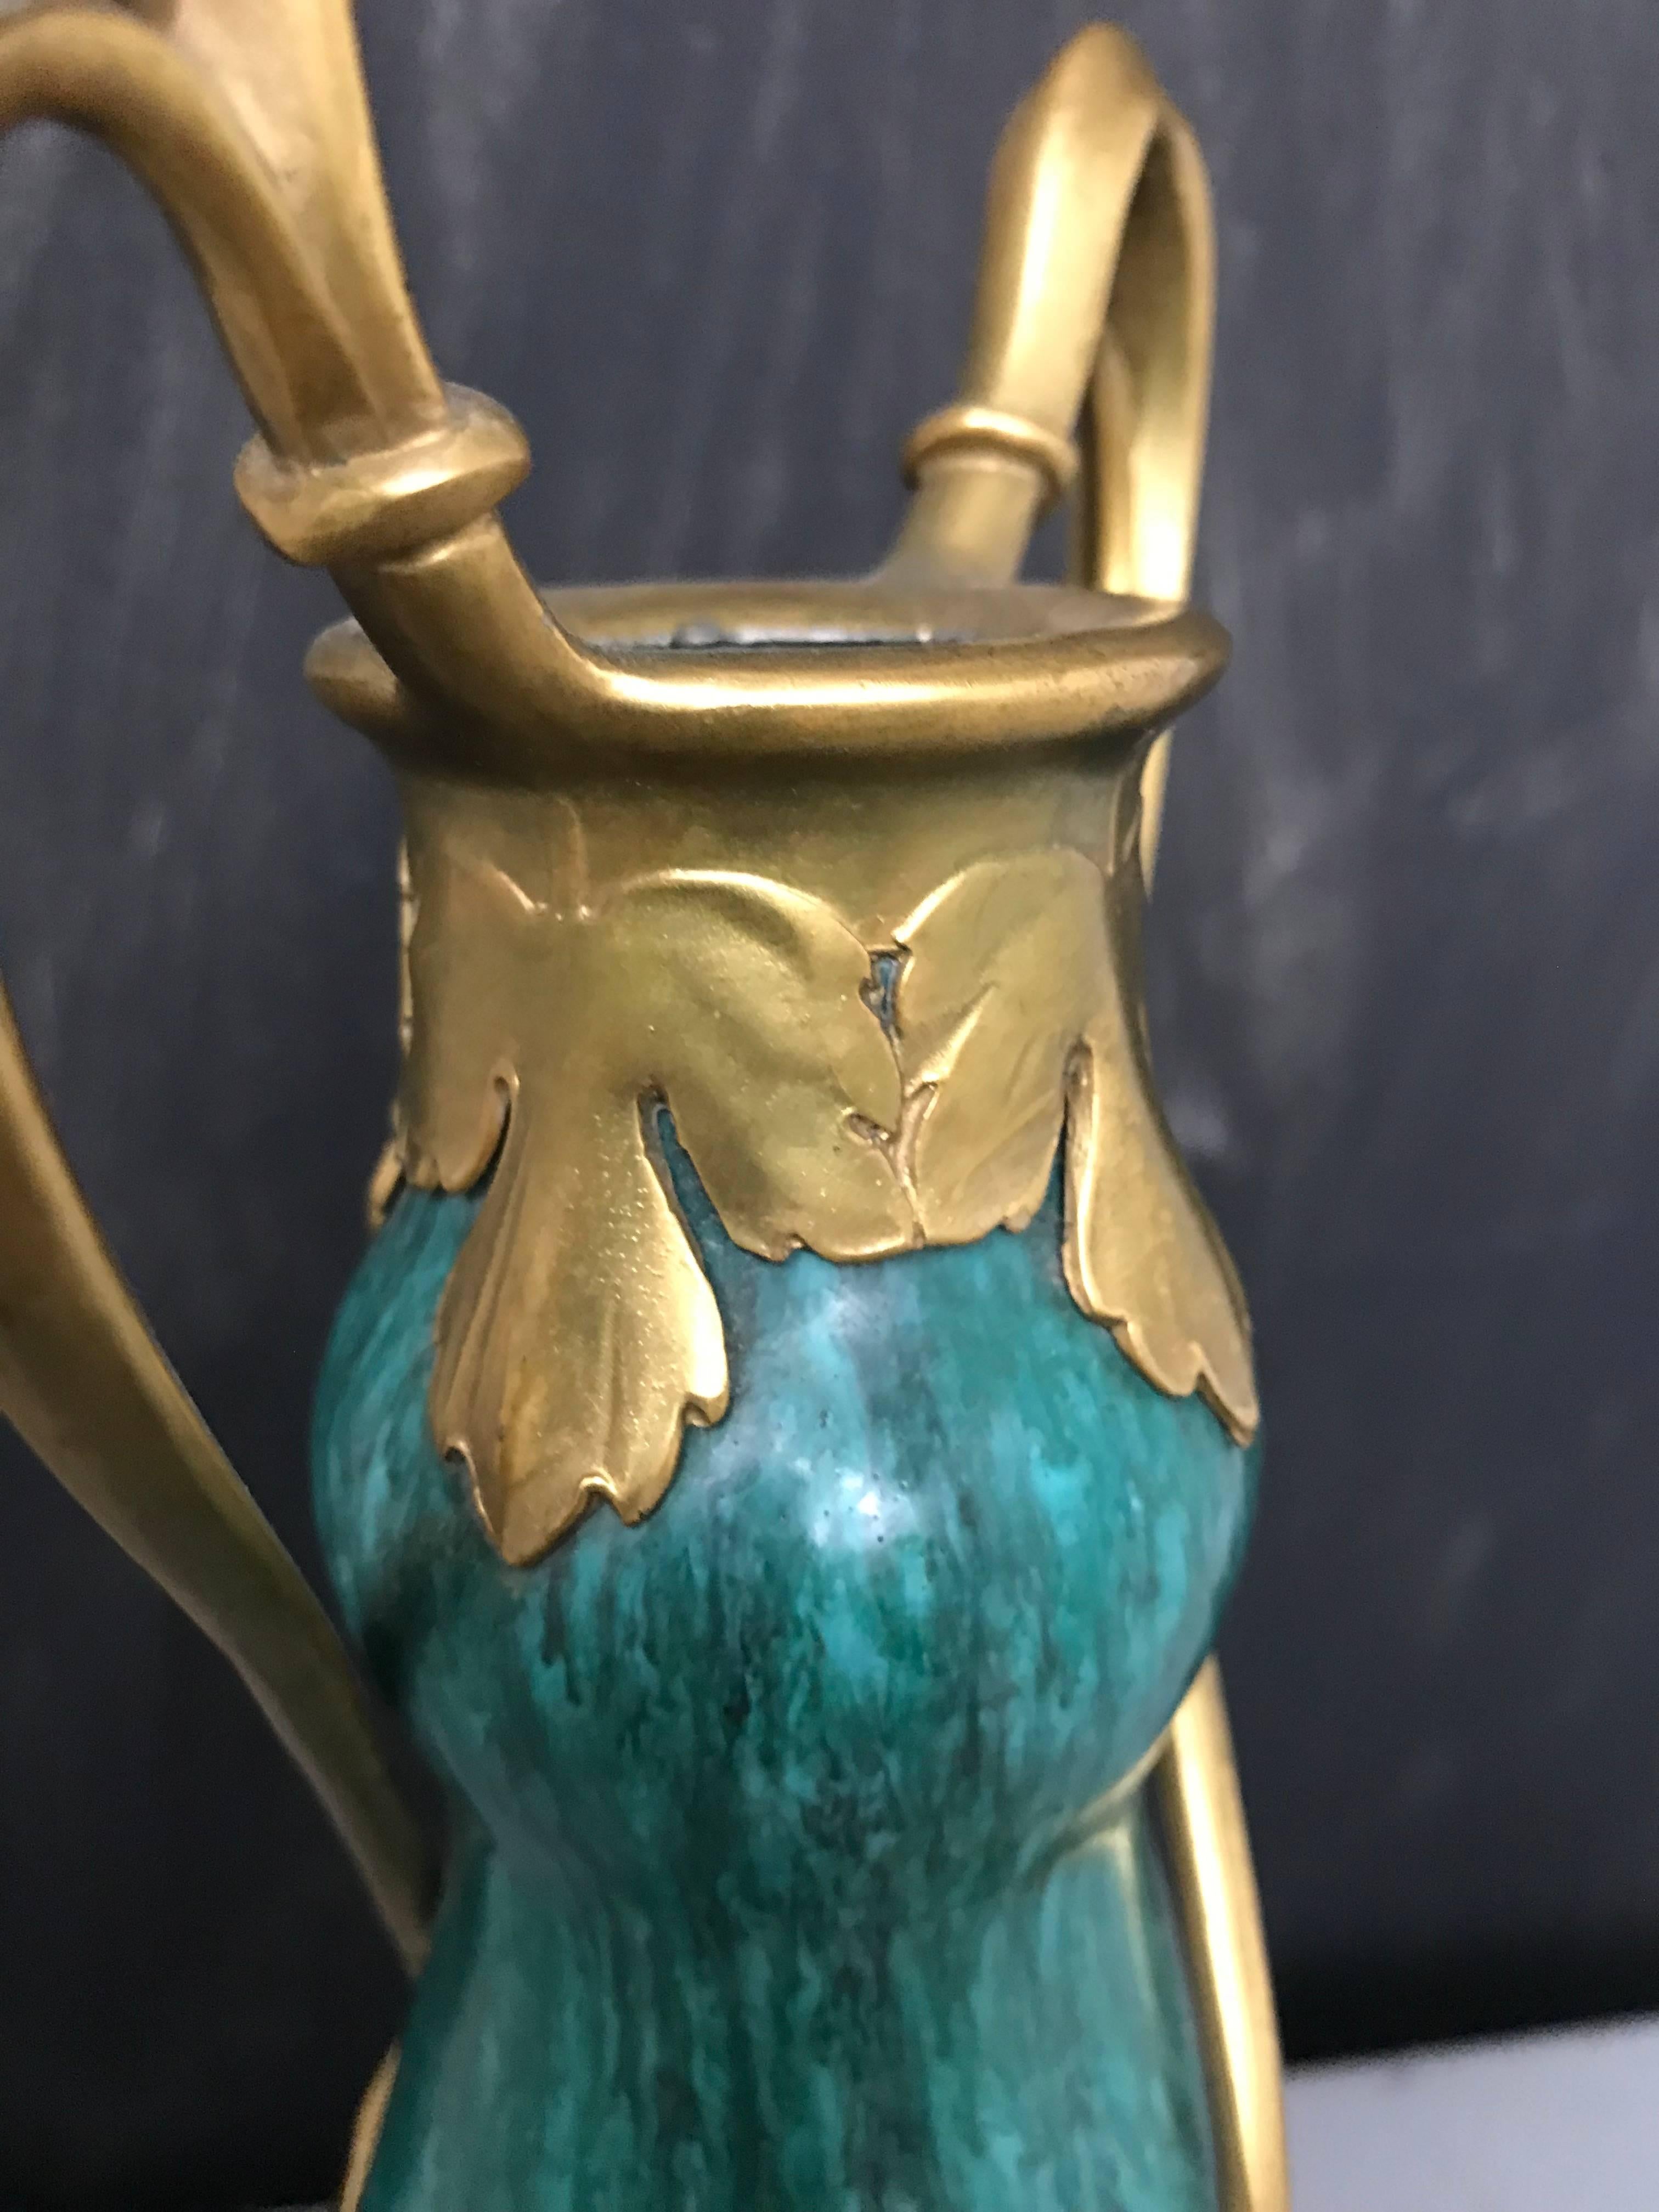 20th Century Striking Art Nouveau Ceramic and Bronze-Mounted Vase in Victor Horta Style For Sale